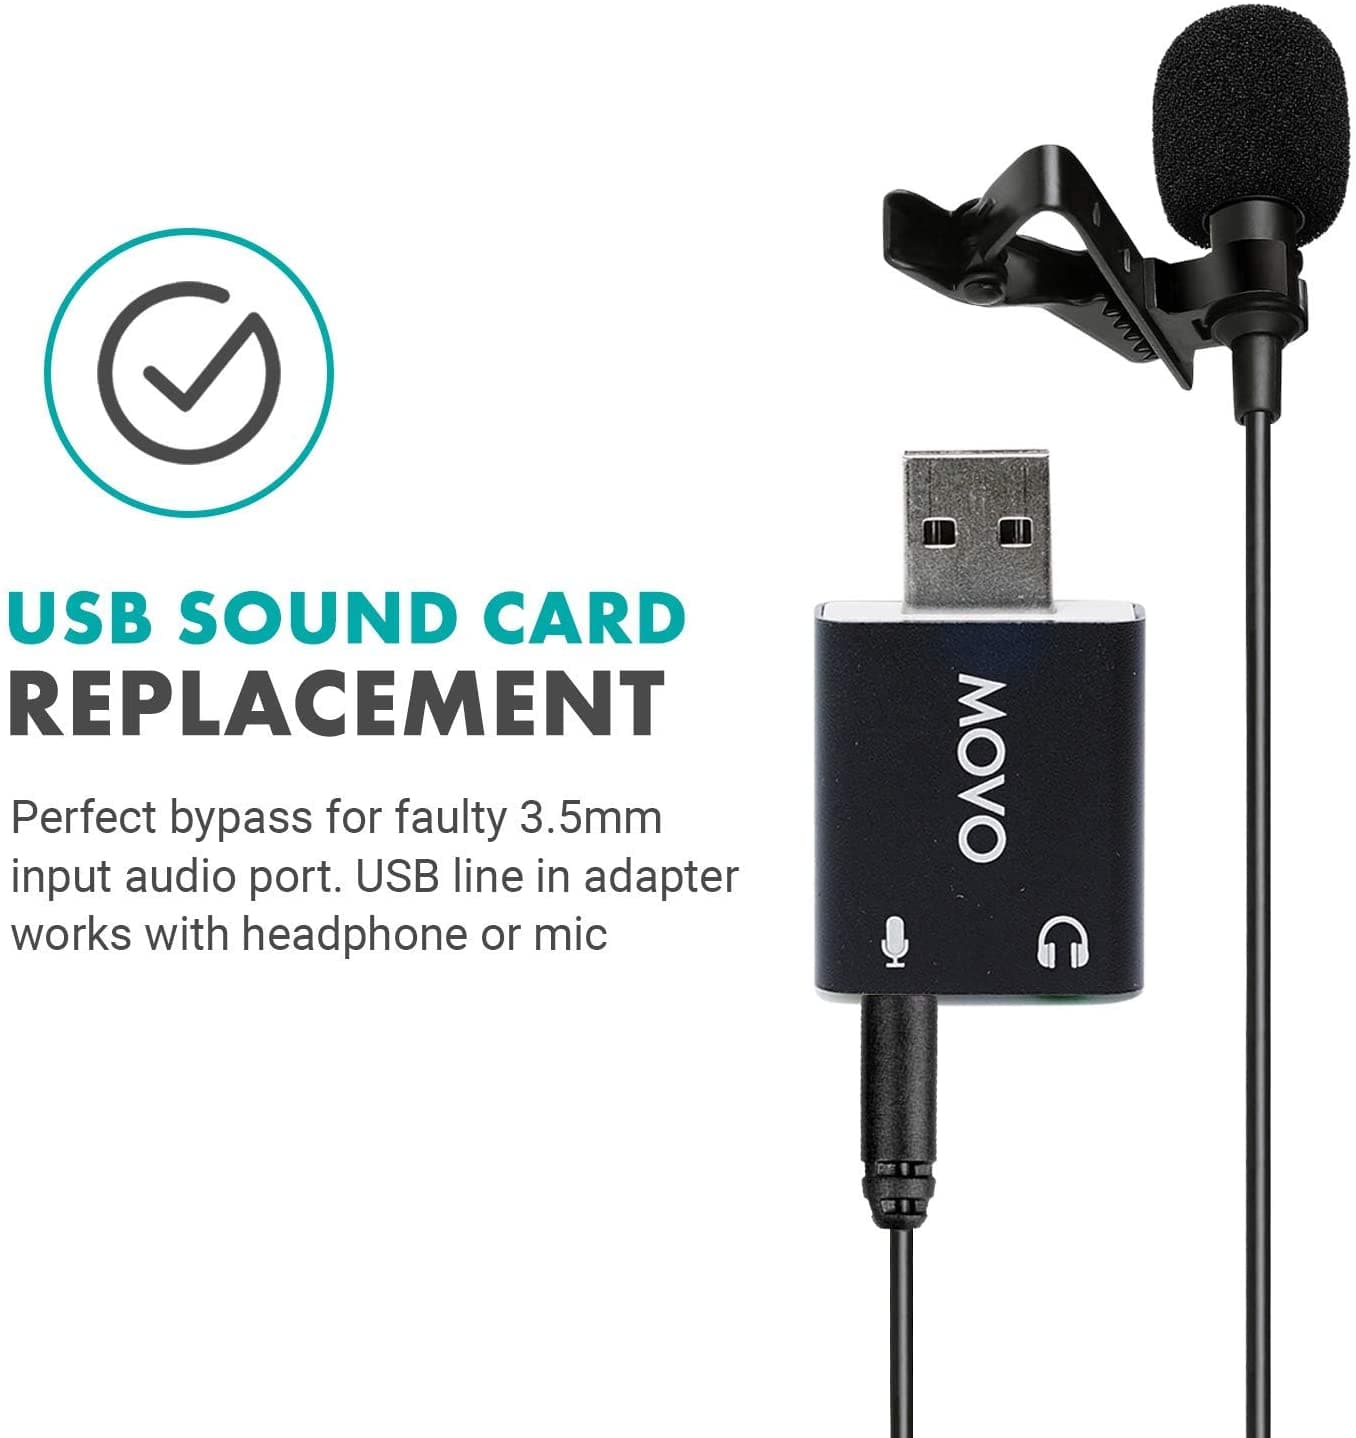 dusin Accord Torrent USB-AC | External USB Stereo Sound Card Adapter for PC & Mac | Movo